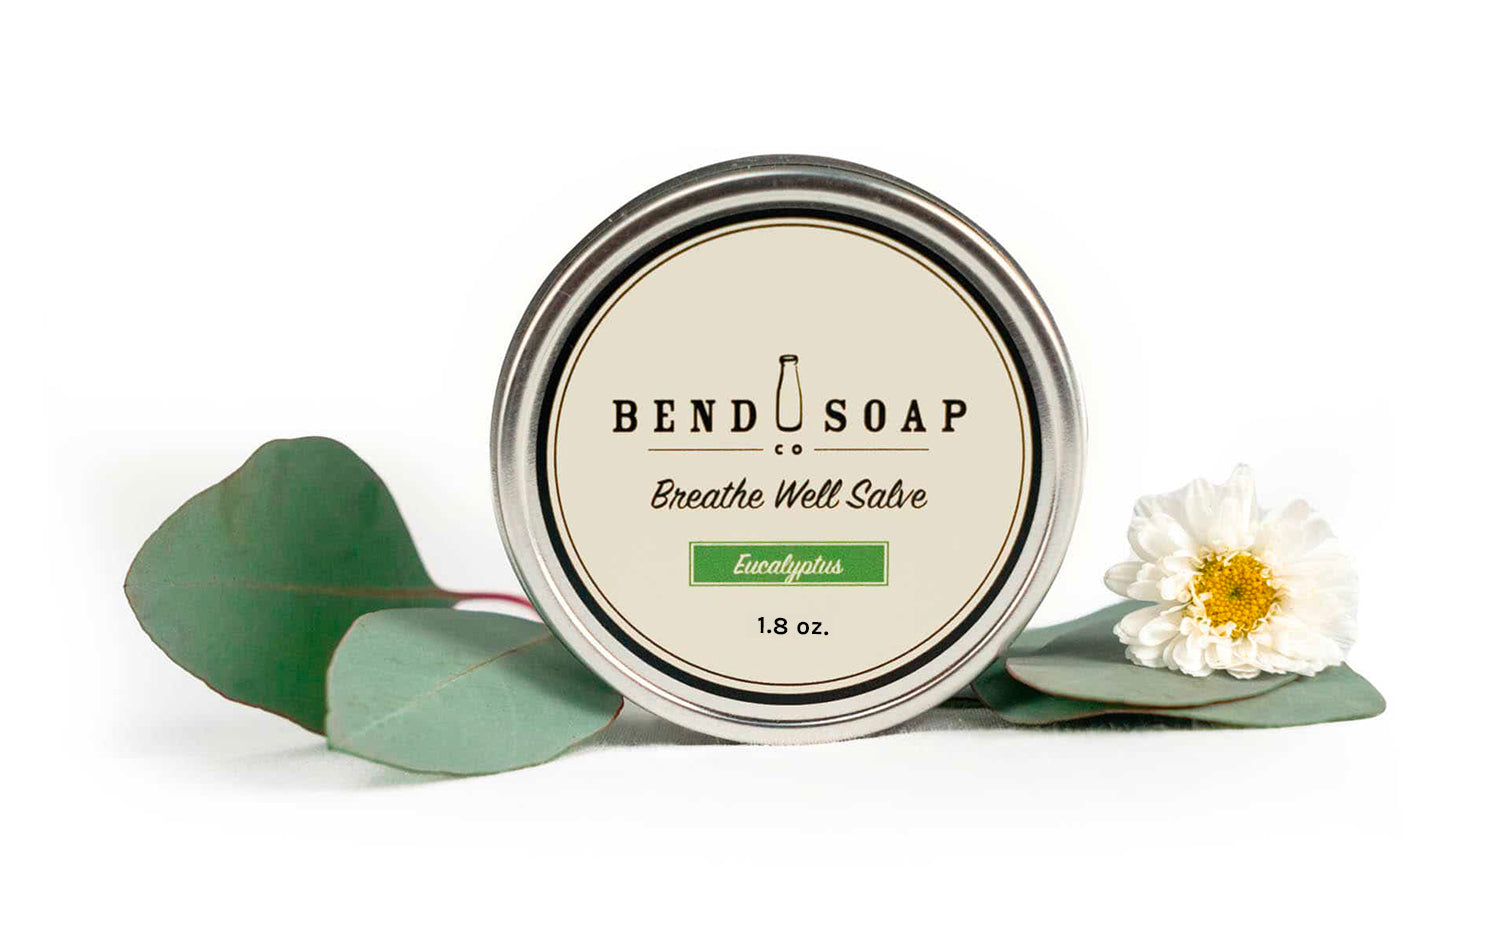 All-natural, Decongestant, Breathe Well Salve with Eucalyptus